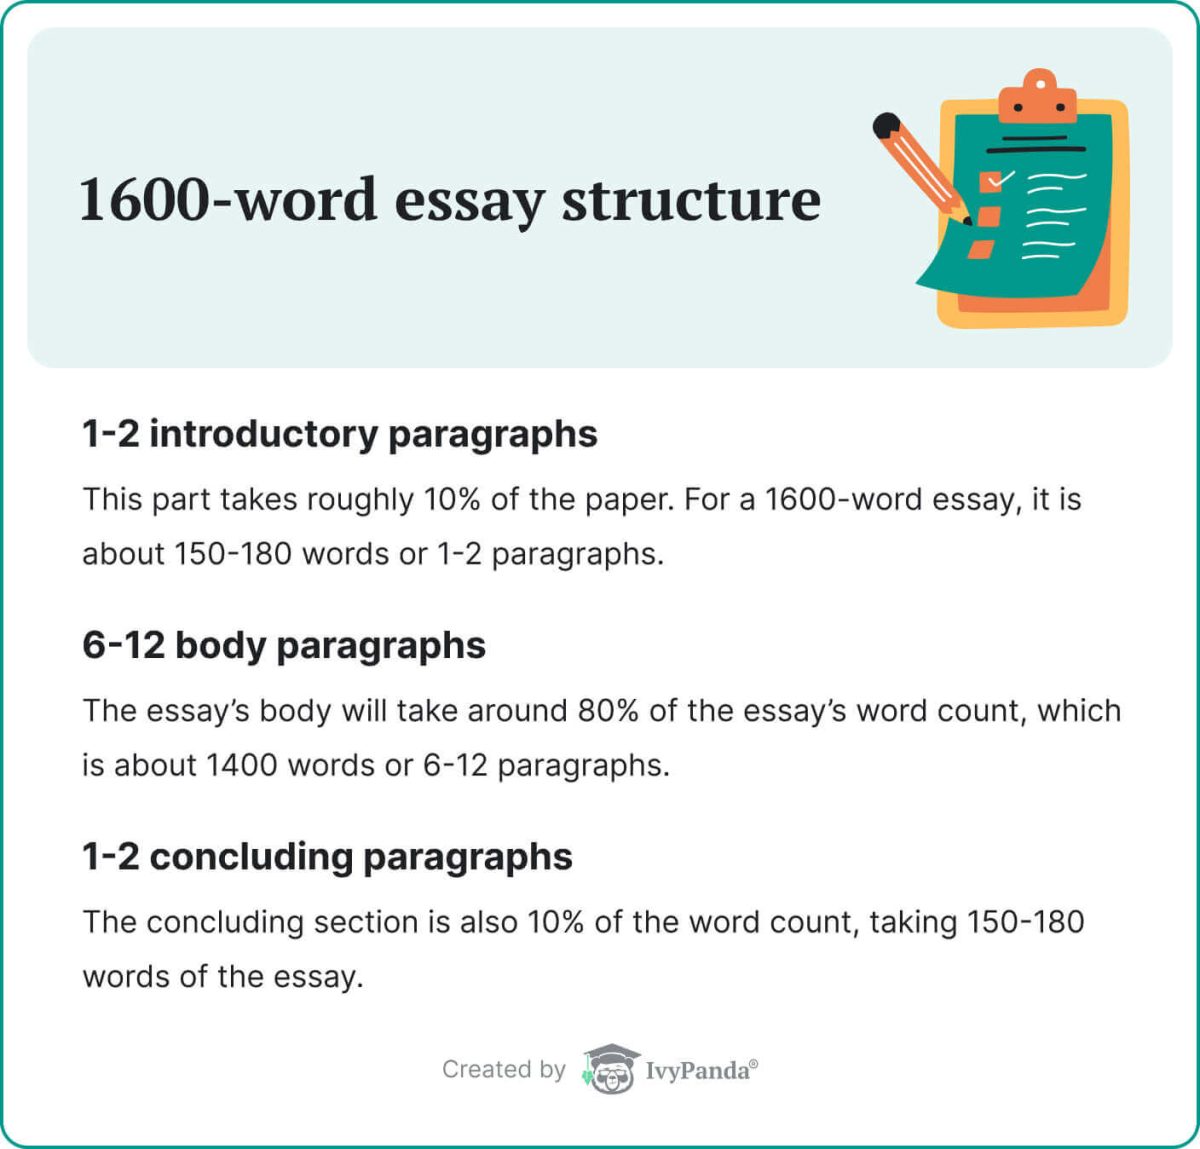 The picture describes 1600-word essay structure. 